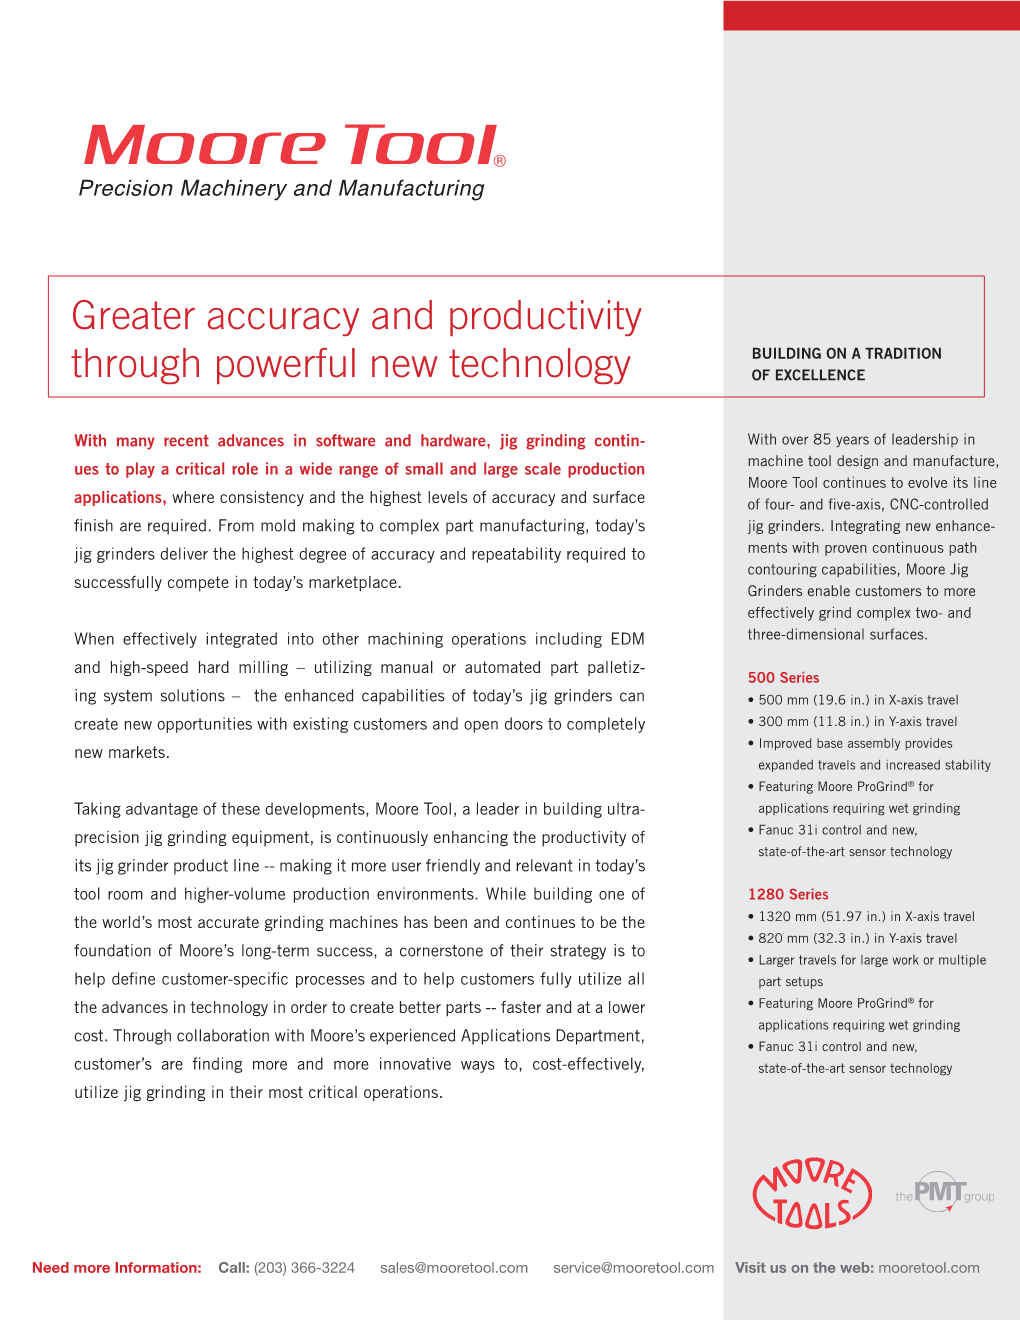 Greater Accuracy and Productivity Through Powerful New Technology